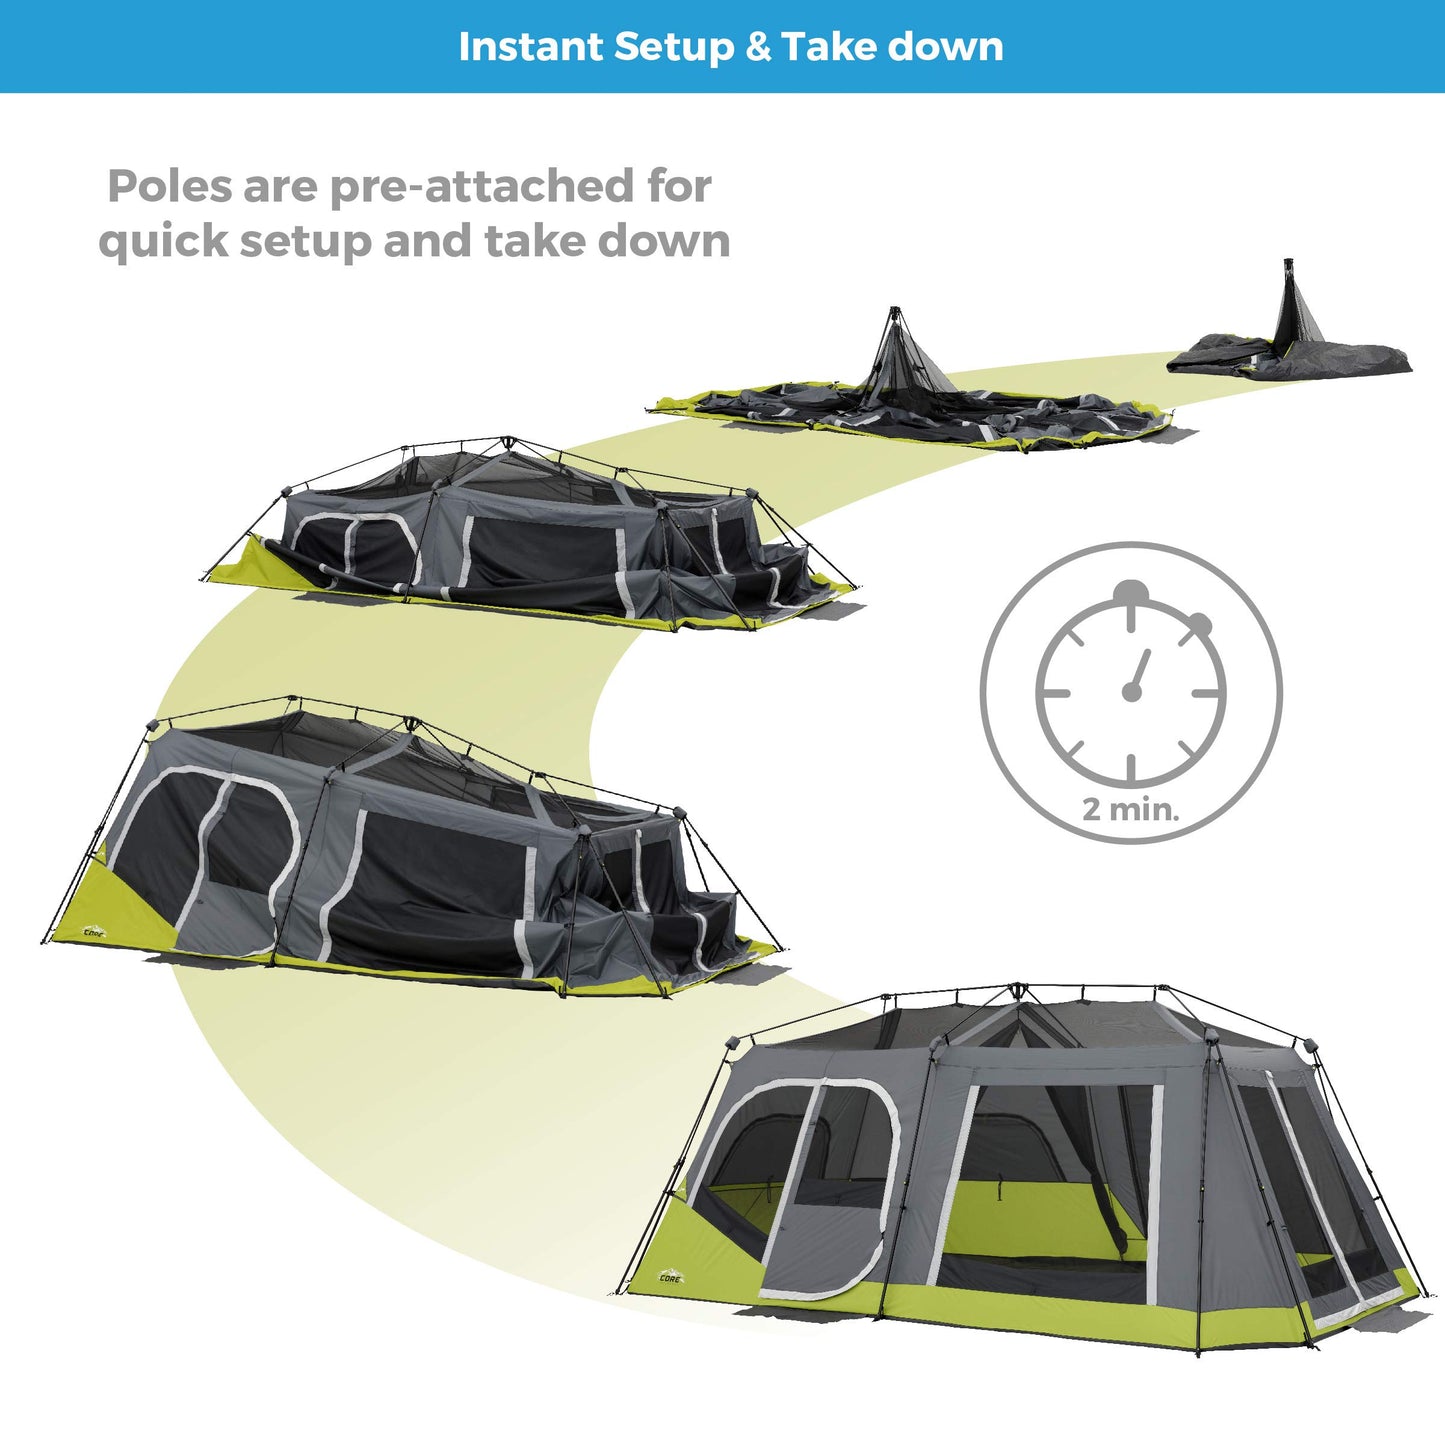 CORE 12 Person Instant Cabin Tent | 3 Room Tent for Family with Storage Pockets for Camping Accessories | Portable Large Pop Up Tent for 2 Minute Camp Setup